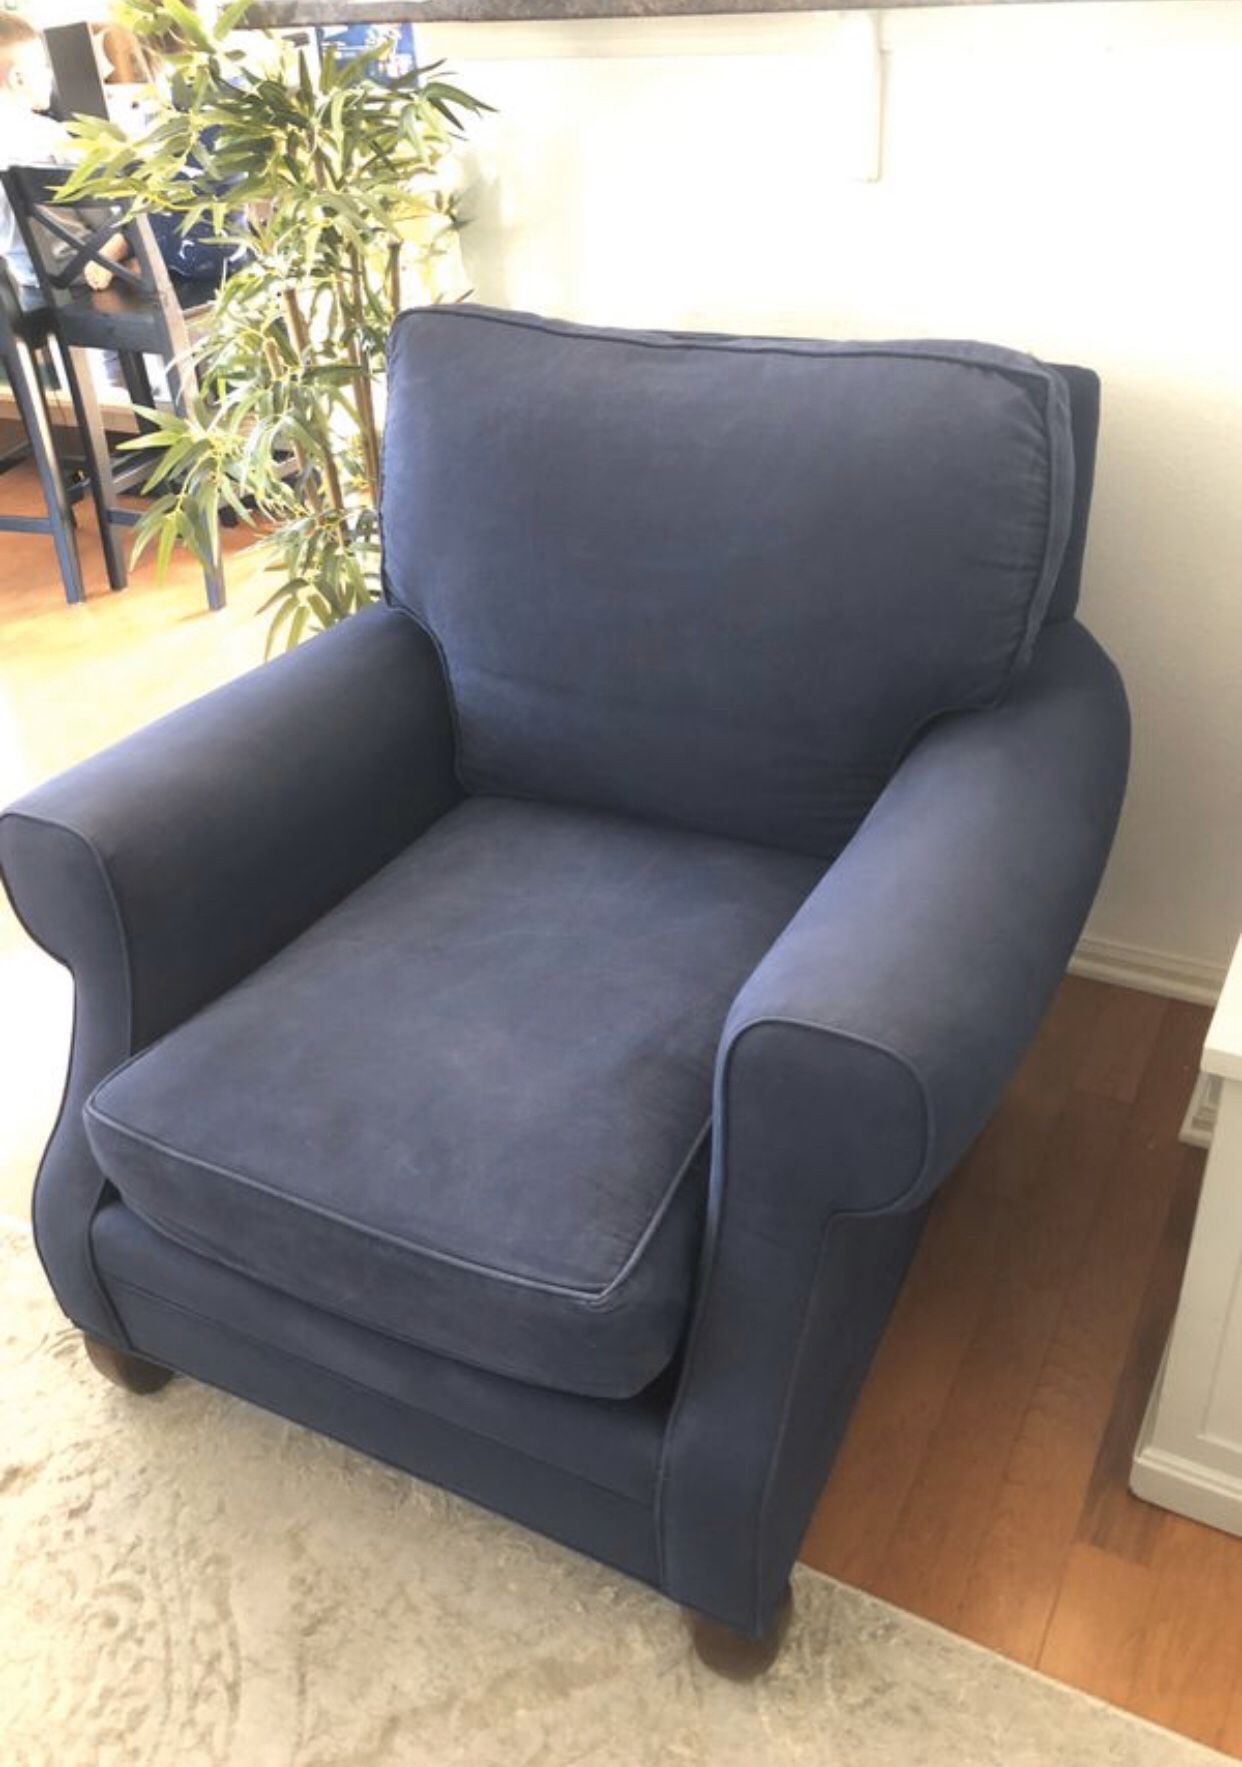 Blue Oversized Club Chairs (set of 2) Buy 1 or both!